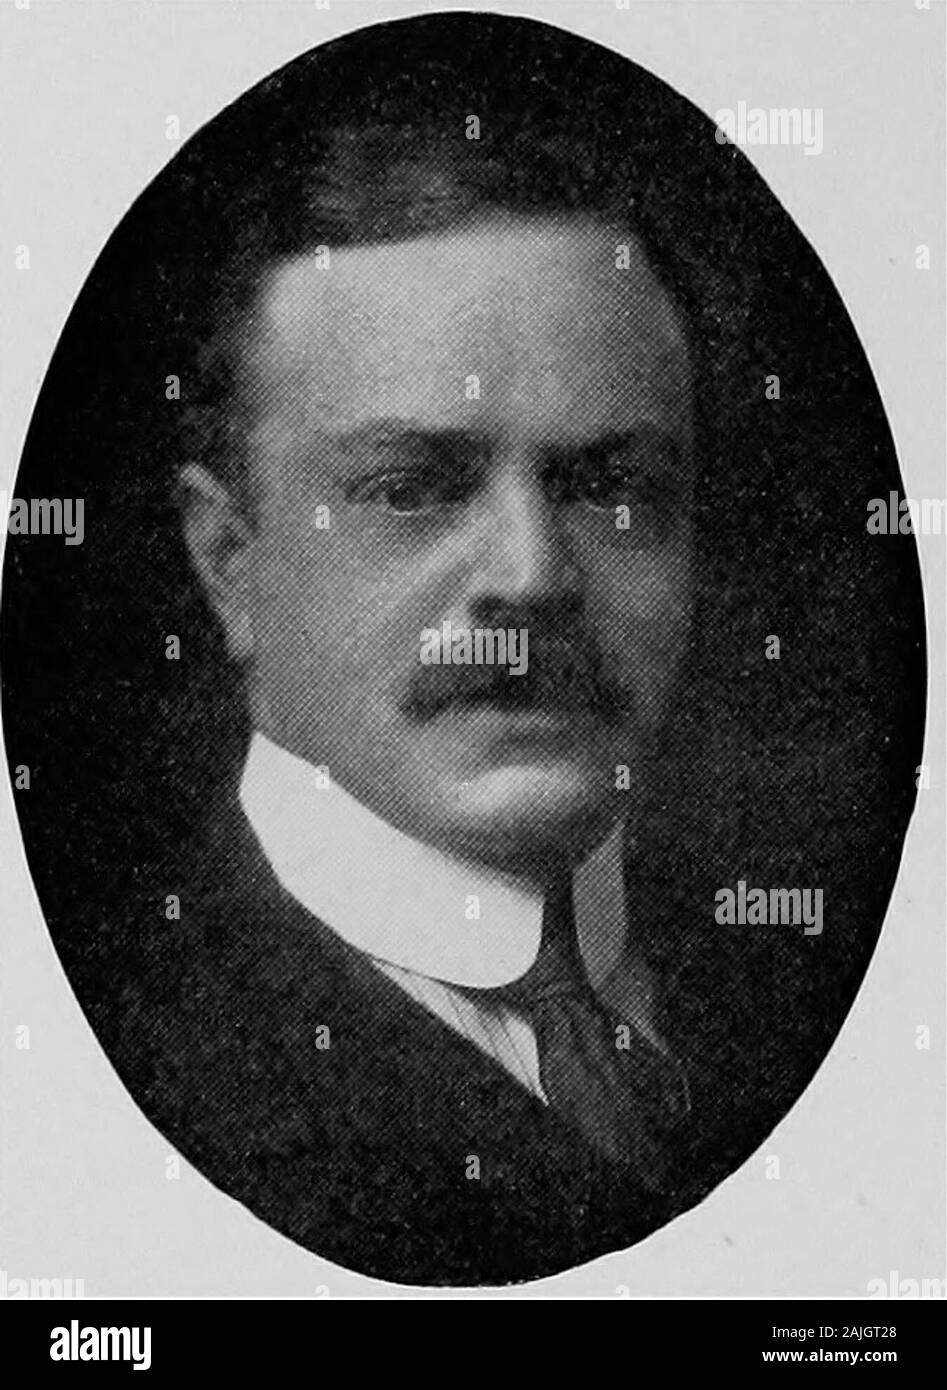 Empire State notabili, 1914 . PETER ZUCKER Consigliere-at-Law, Pres. Board of Education Cleveland 1887-1888 New York City CHRISTOPHER H. R. Avvocato Woodward, Brewer, Vlce-Pres., Secy e Dir. Clausen-Flanagan Brewing Co. New York City 150 Empire State notabili avvocati. JOHN R. LOCKE Avvocato New York City Foto Stock